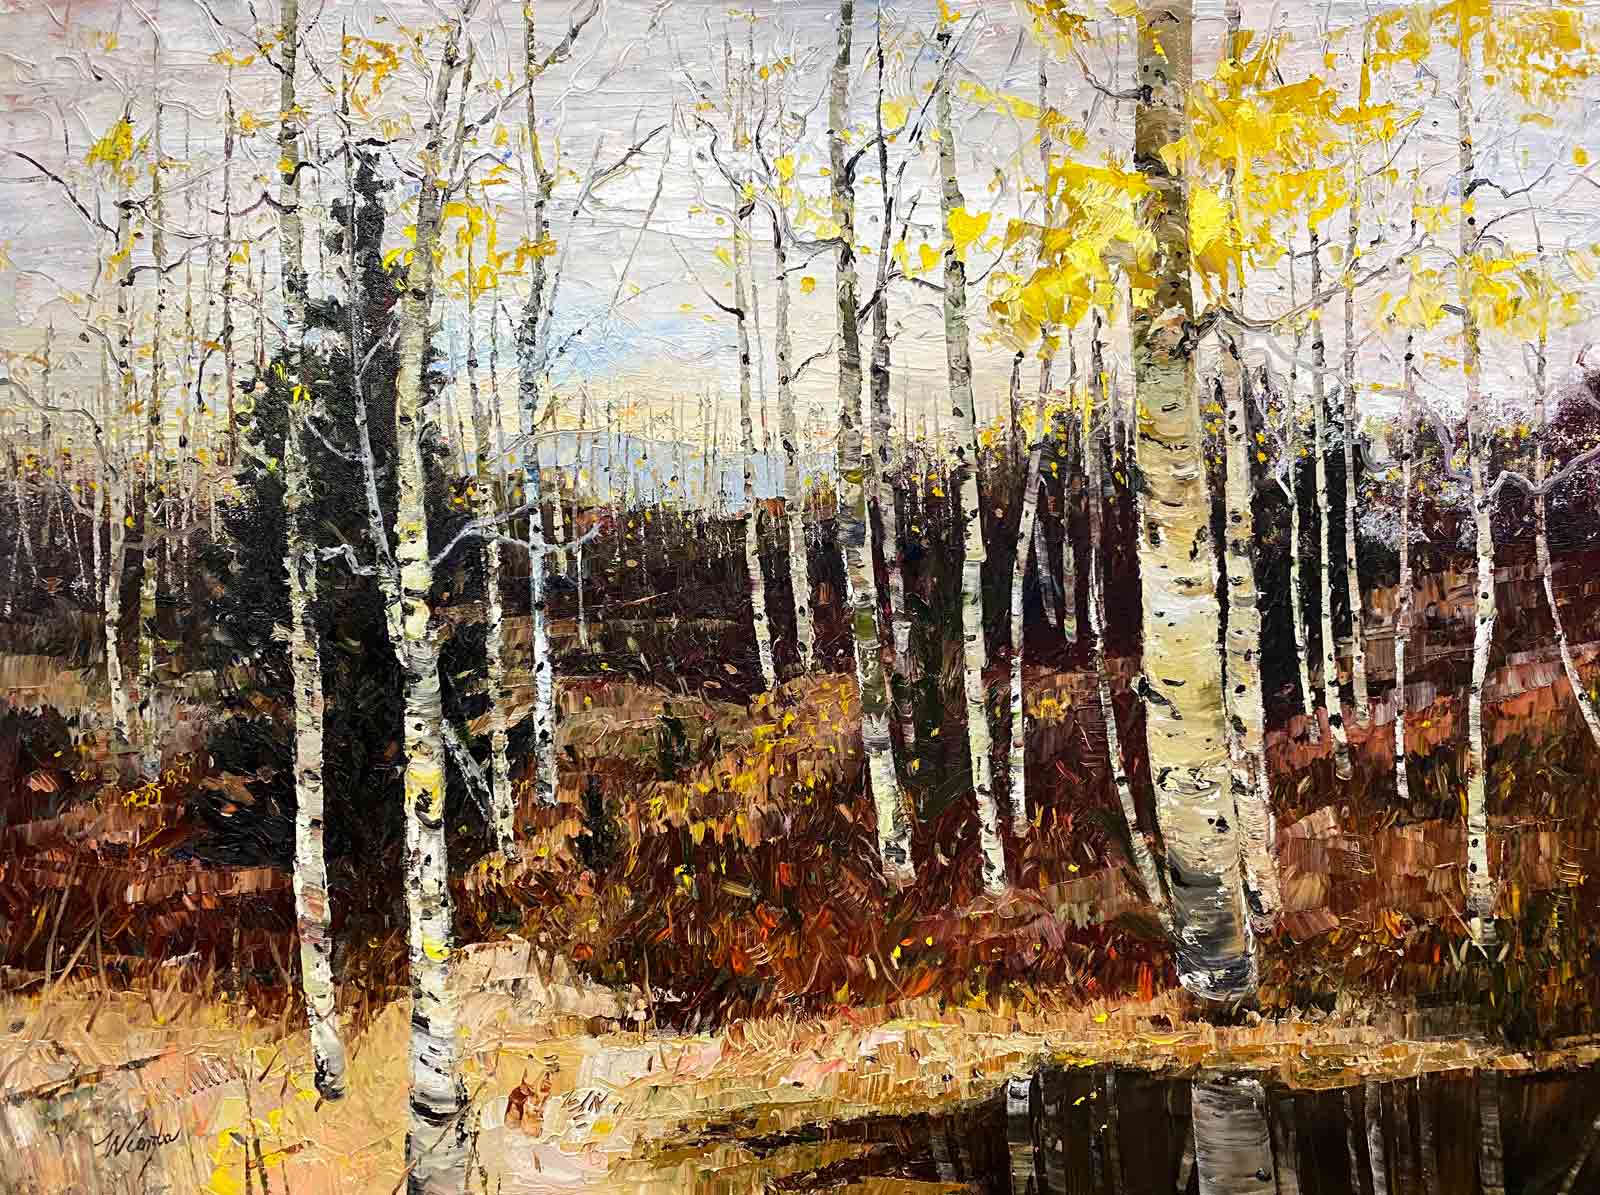 Late Fall oil painting of Aspen trees and their reflections.